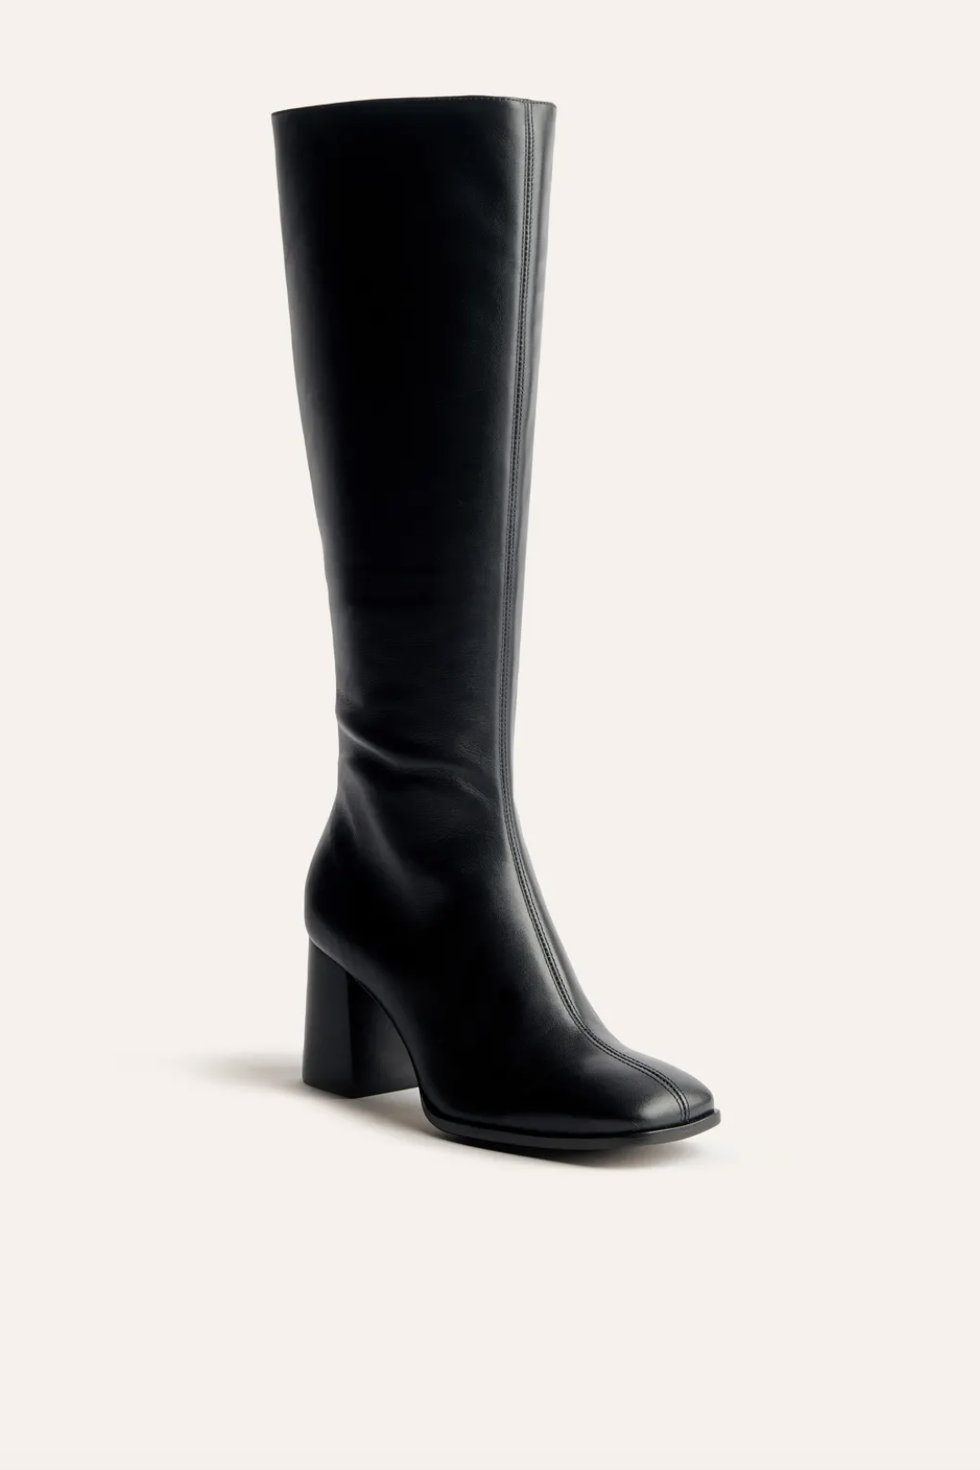 Gucci Women's Knee High Boots & Tall Boots - Bloomingdale's